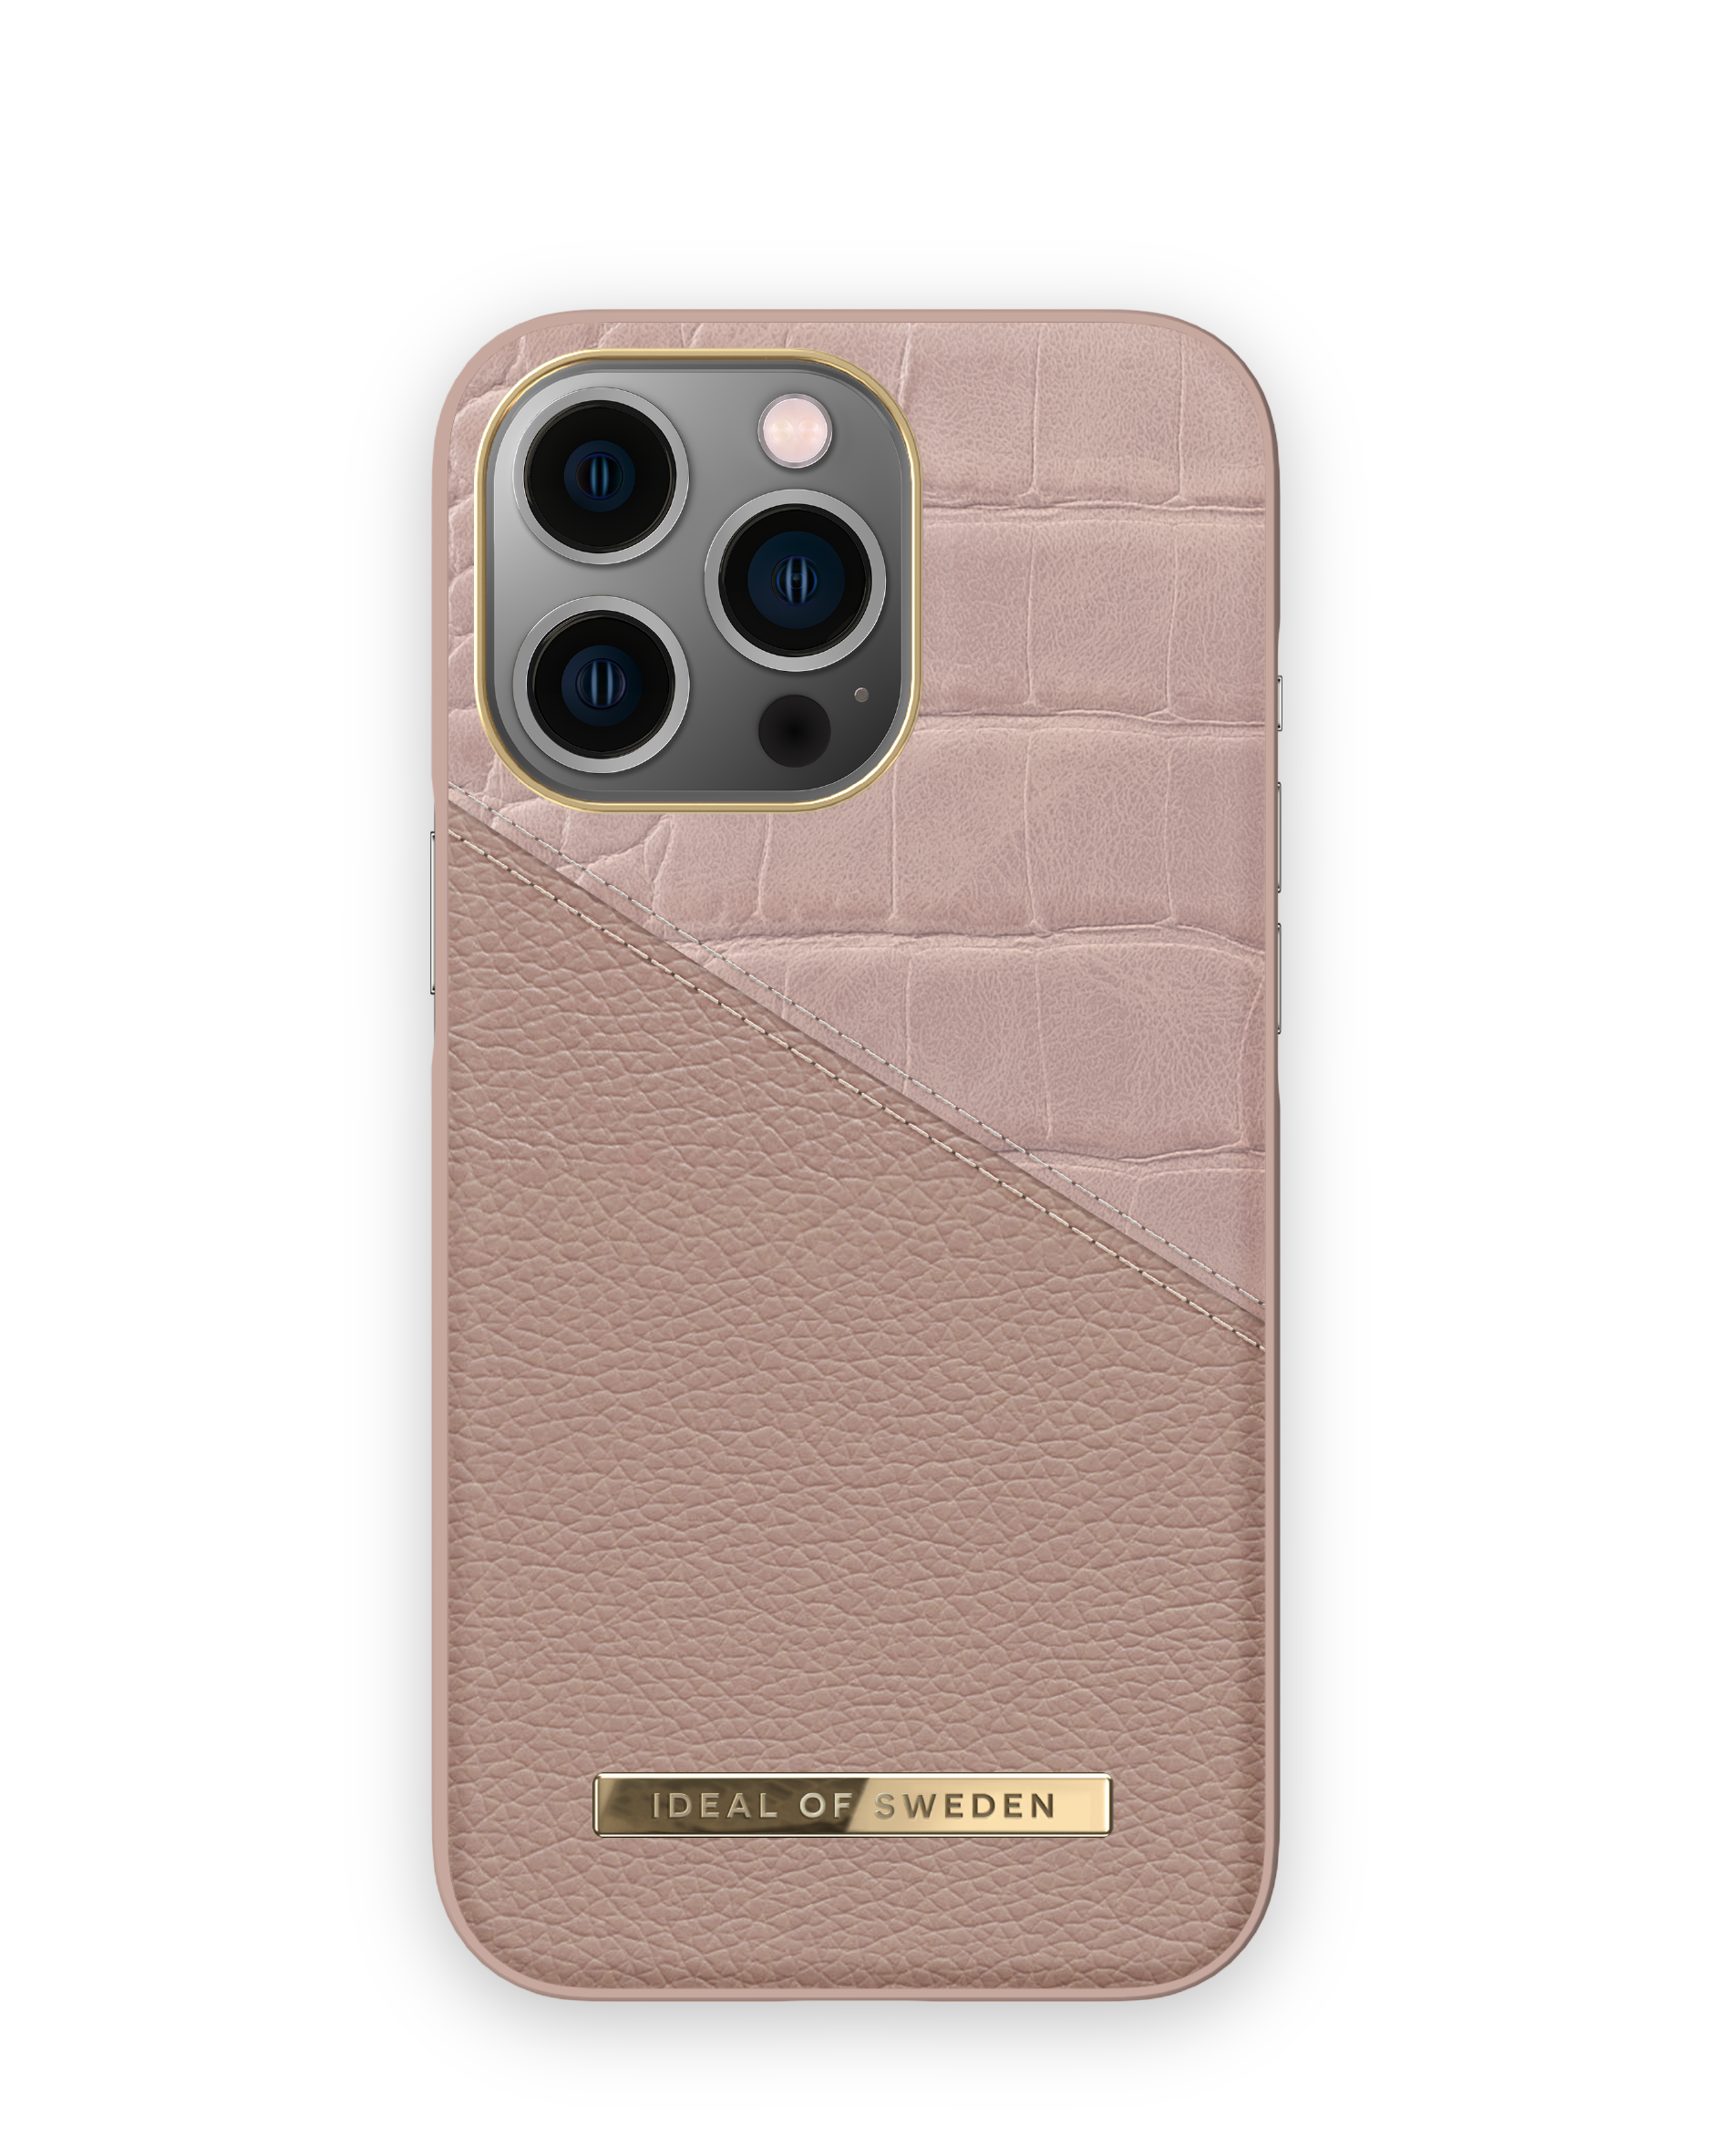 IDEAL OF SWEDEN IDACSS20-I2161P-202, Smoke Rose Apple, 13 Backcover, Pro, iPhone Croco